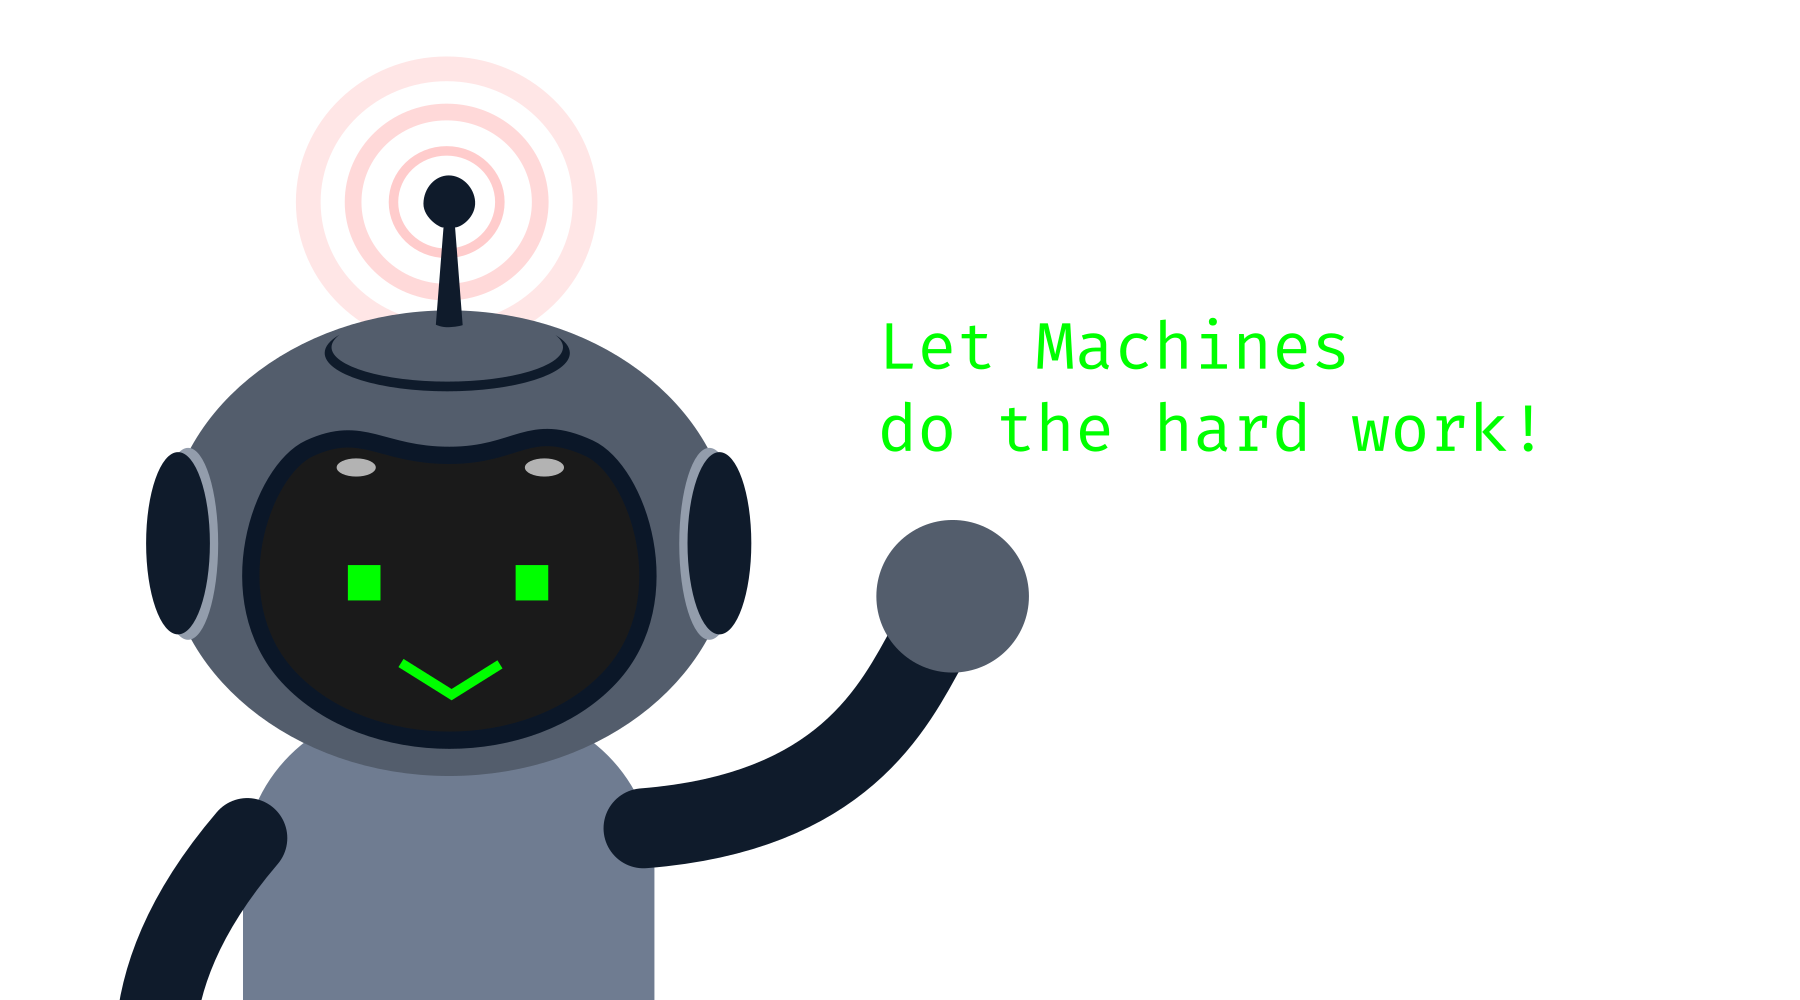 Let machines do the hard work.